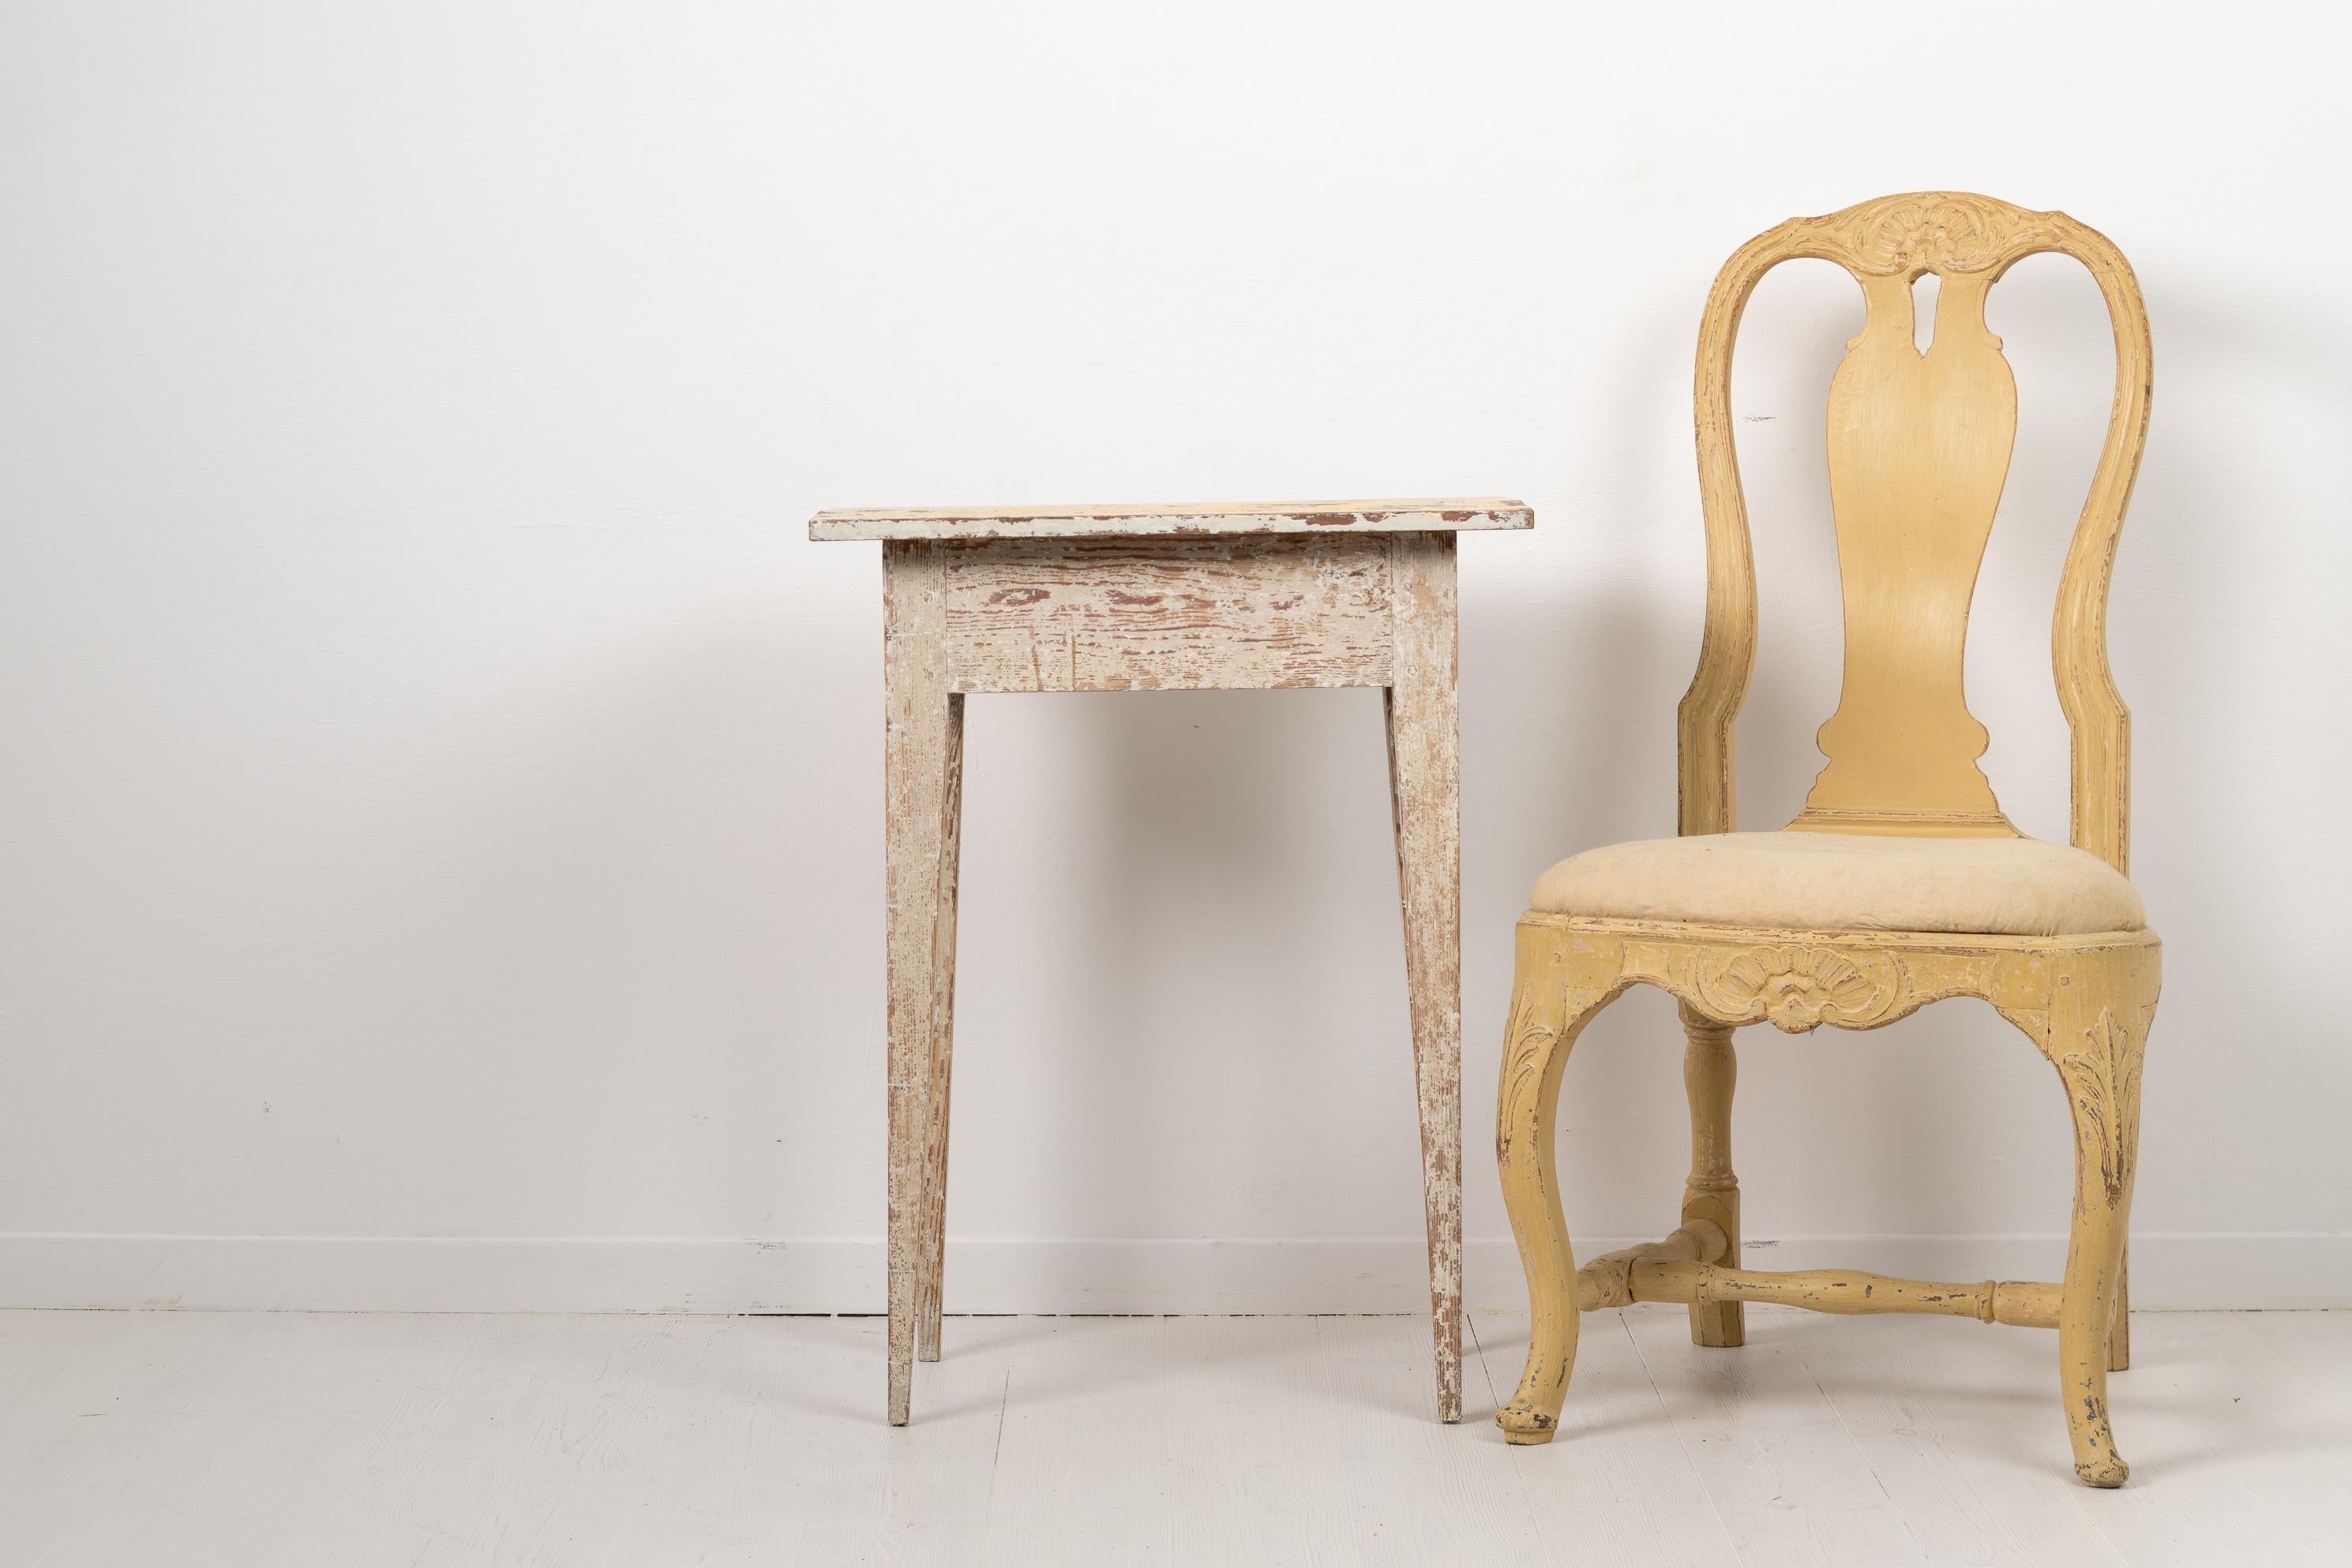 Swedish side table from the gustavian period made around 1790. The table is Swedish pine with a rectangular table top and straight tapered legs. Dry scraped by hand to the first and original layer of paint. The table has a rustic and patinated